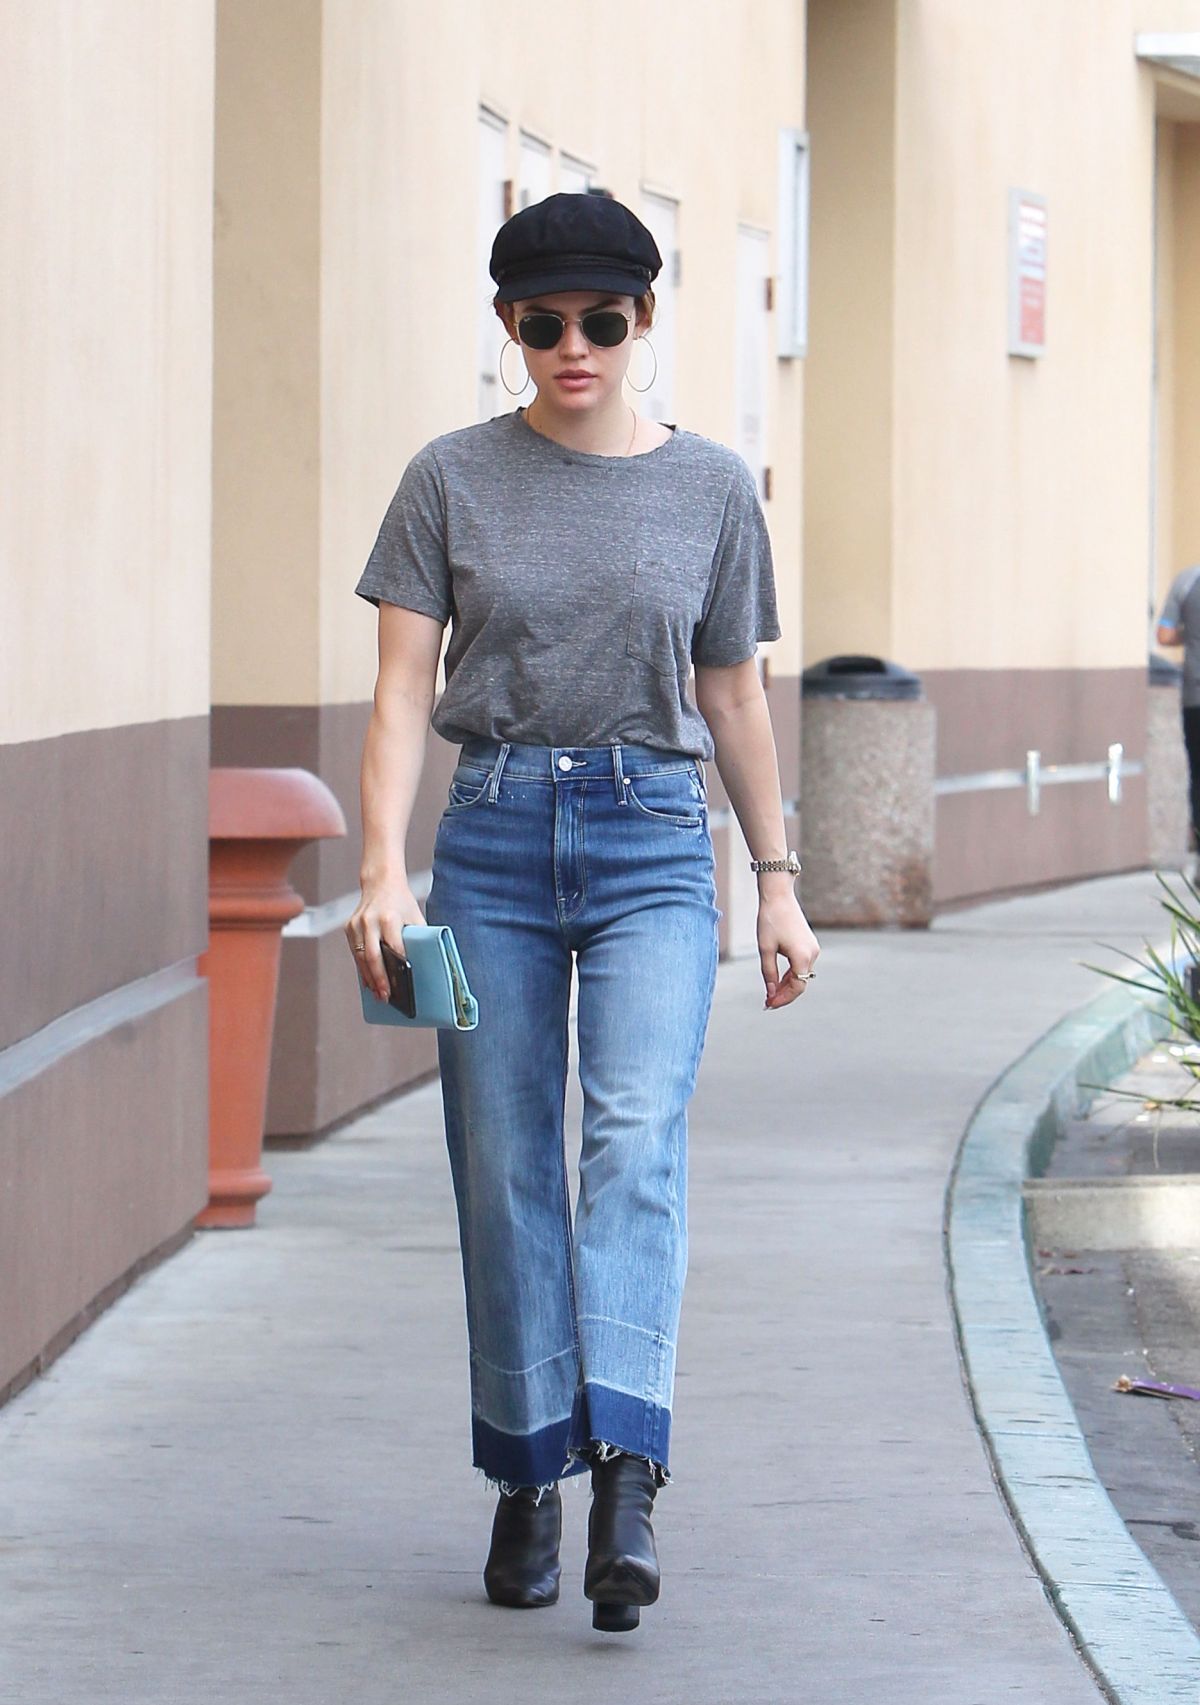 LUCY HALE in Jeans Out for Coffee in Los Angeles 04/04/2018 – HawtCelebs